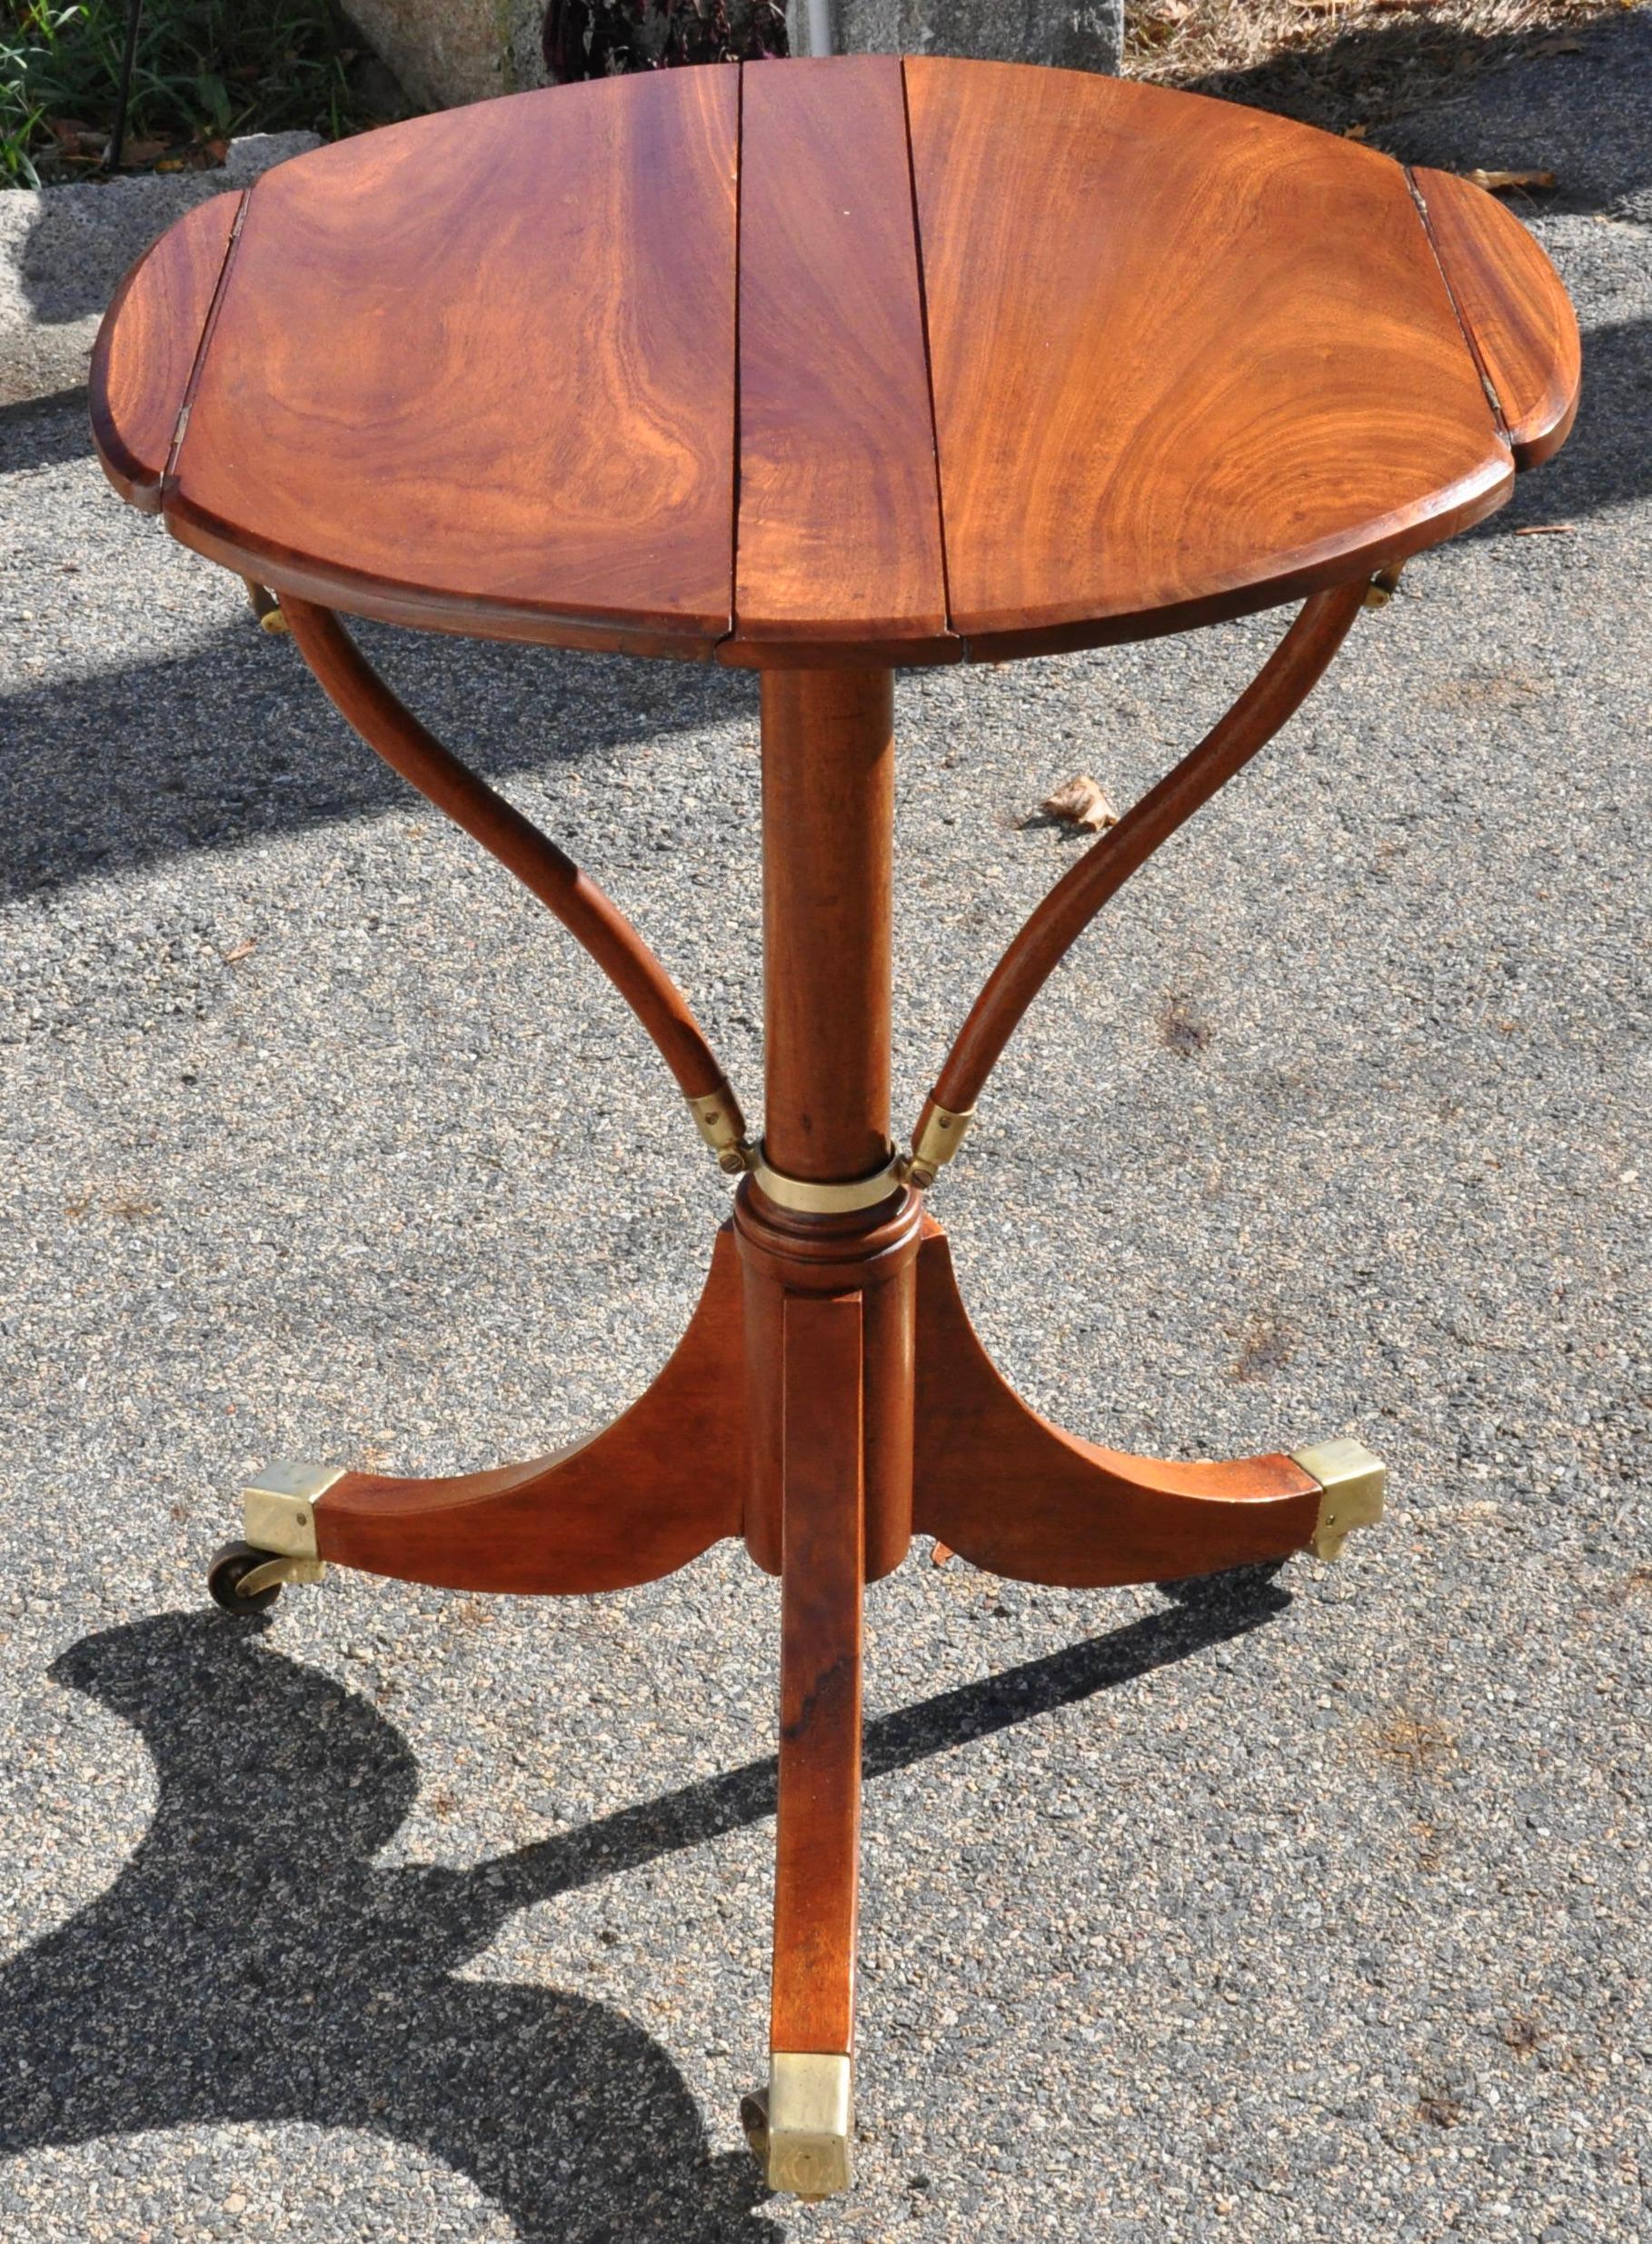 19th century metamorphic walnut music stand. Begins as a table at 31